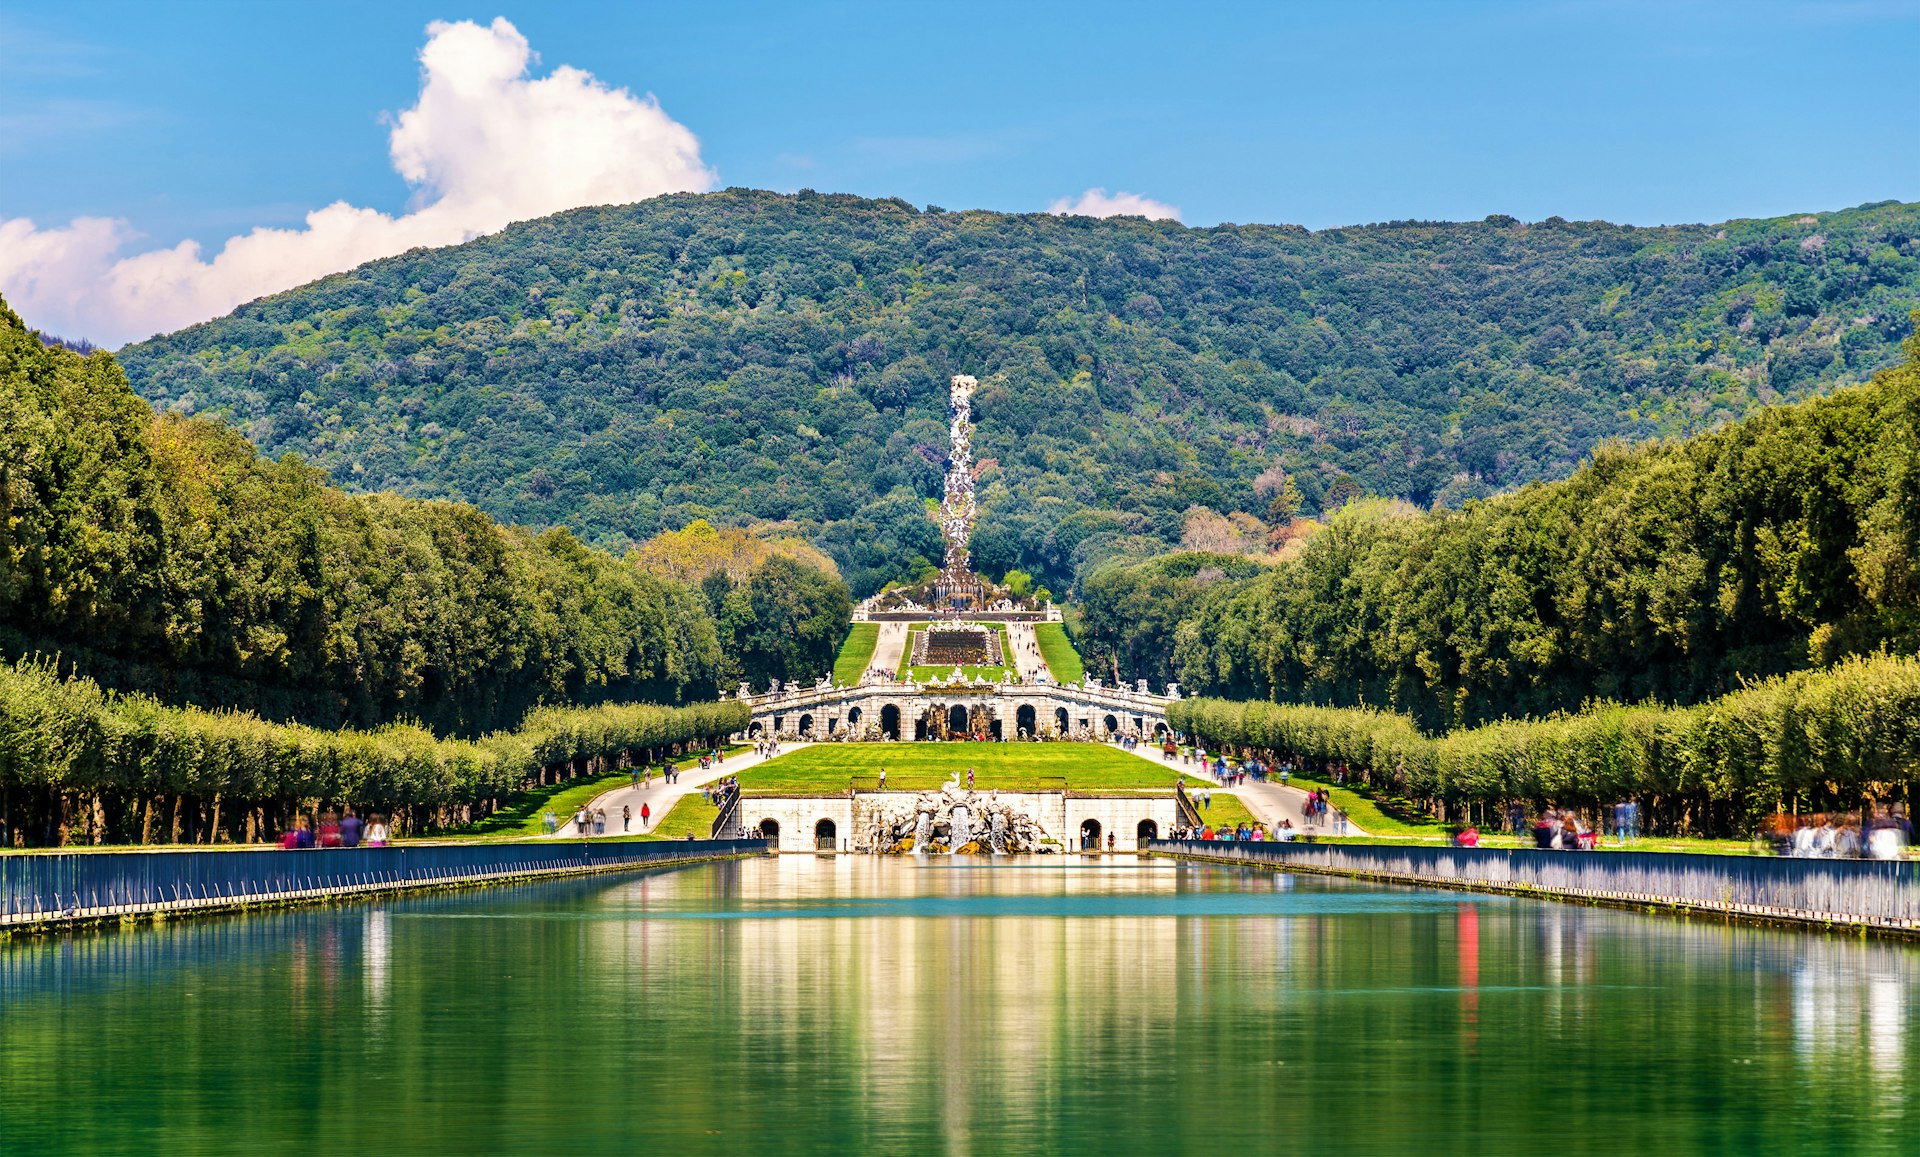 A picture of the vast gardens of the Palace of Caserta on a very beautiful and sunny day